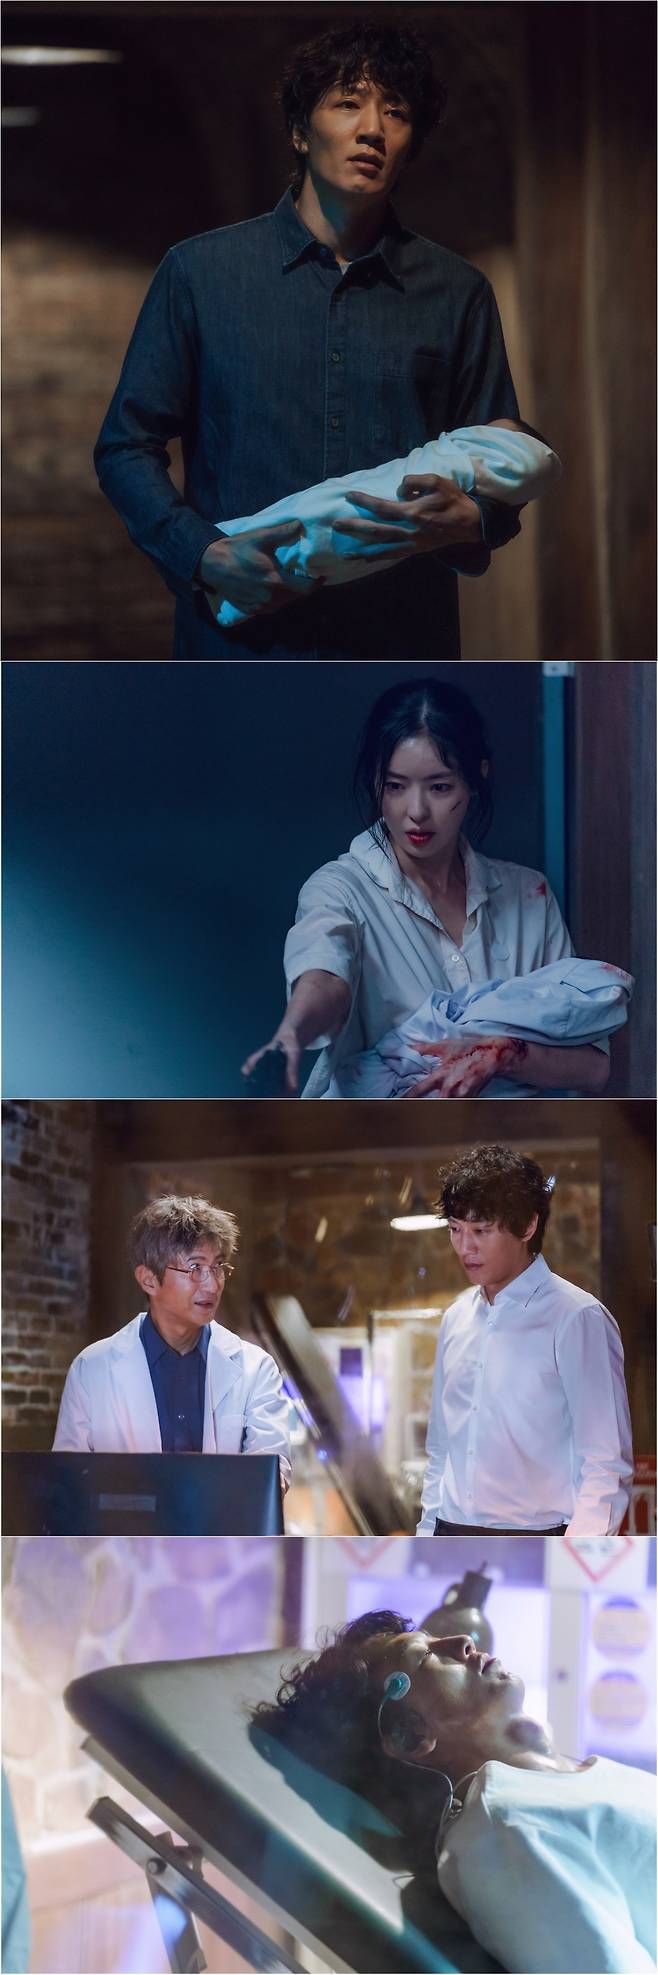 Seoul = = Luca: The Beginning Kim Rae-wons dangerous choice causes a blueTVNs monthly drama Luca: The Bigginning (playplayed by Chun Sung-il/directed by Kim Hong-sun) released a still cut on the 7th, which shows the mixed fate of G.O (Kim Rae-won) and Lee Da-hee who are trying to protect their daughter in their own way.Earlier, G.O. fought for his life to protect the kidnapped cloud and his daughter, but the reality was brutal.Clouds pushed him away, saying that the daughter who inherited the G.O.s genes could not be allowed to live in tragic fate.G.Os determination to turn everything around even if it turned the world around was at stake.Ryu Jung-kwon (Guidance Prize) and Hwang Jeong-a (Jin Kyung-min) cleverly dug into the wounds and fears of G.O.G.O began to shake when he said that dominating the world was the only way to protect his family, and eventually took the hand of Hwang Jing-a.The blackening of G.O, which showed transcendental ability in front of the congregation, caused shock and creeps with a reversal beyond imagination.In the meantime, the picture of the mixed G.O and the clouds in the public photos raises sadness.He holds the child he wanted to hold so much, and his face is filled with sadness. The clouds that escaped are also holding his daughter and pointing the gun at someone.G.O and the fate of the clouds, which have made different choices to protect their daughters, cause curiosity about where they will flow.The ensuing picture heightens the sense of crisis: G.O. stands alongside Ryu Jung-kwon, who is bent on creating a new human race that will dominate the world.Ryu Jung-kwon said, It is the least number of individuals to dominate the world. He said, You are a worshipable being.G.O, who has risen to the nightmare experiment, is focused on what choice he made in the repatriation of Ryu Jung-kwon and his dangerous move to the catastrophe.Luca: The Bigginning production team said, An extraordinary change comes to the body of a baby with stronger ability than G.O. G.O makes a dangerous decision for this. Watch the fate of G.O and clouds that have begun to cross, and what the choice of the two will bring about.Meanwhile, Luca: The Bigginning airs every Monday and Tuesday at 9pm.